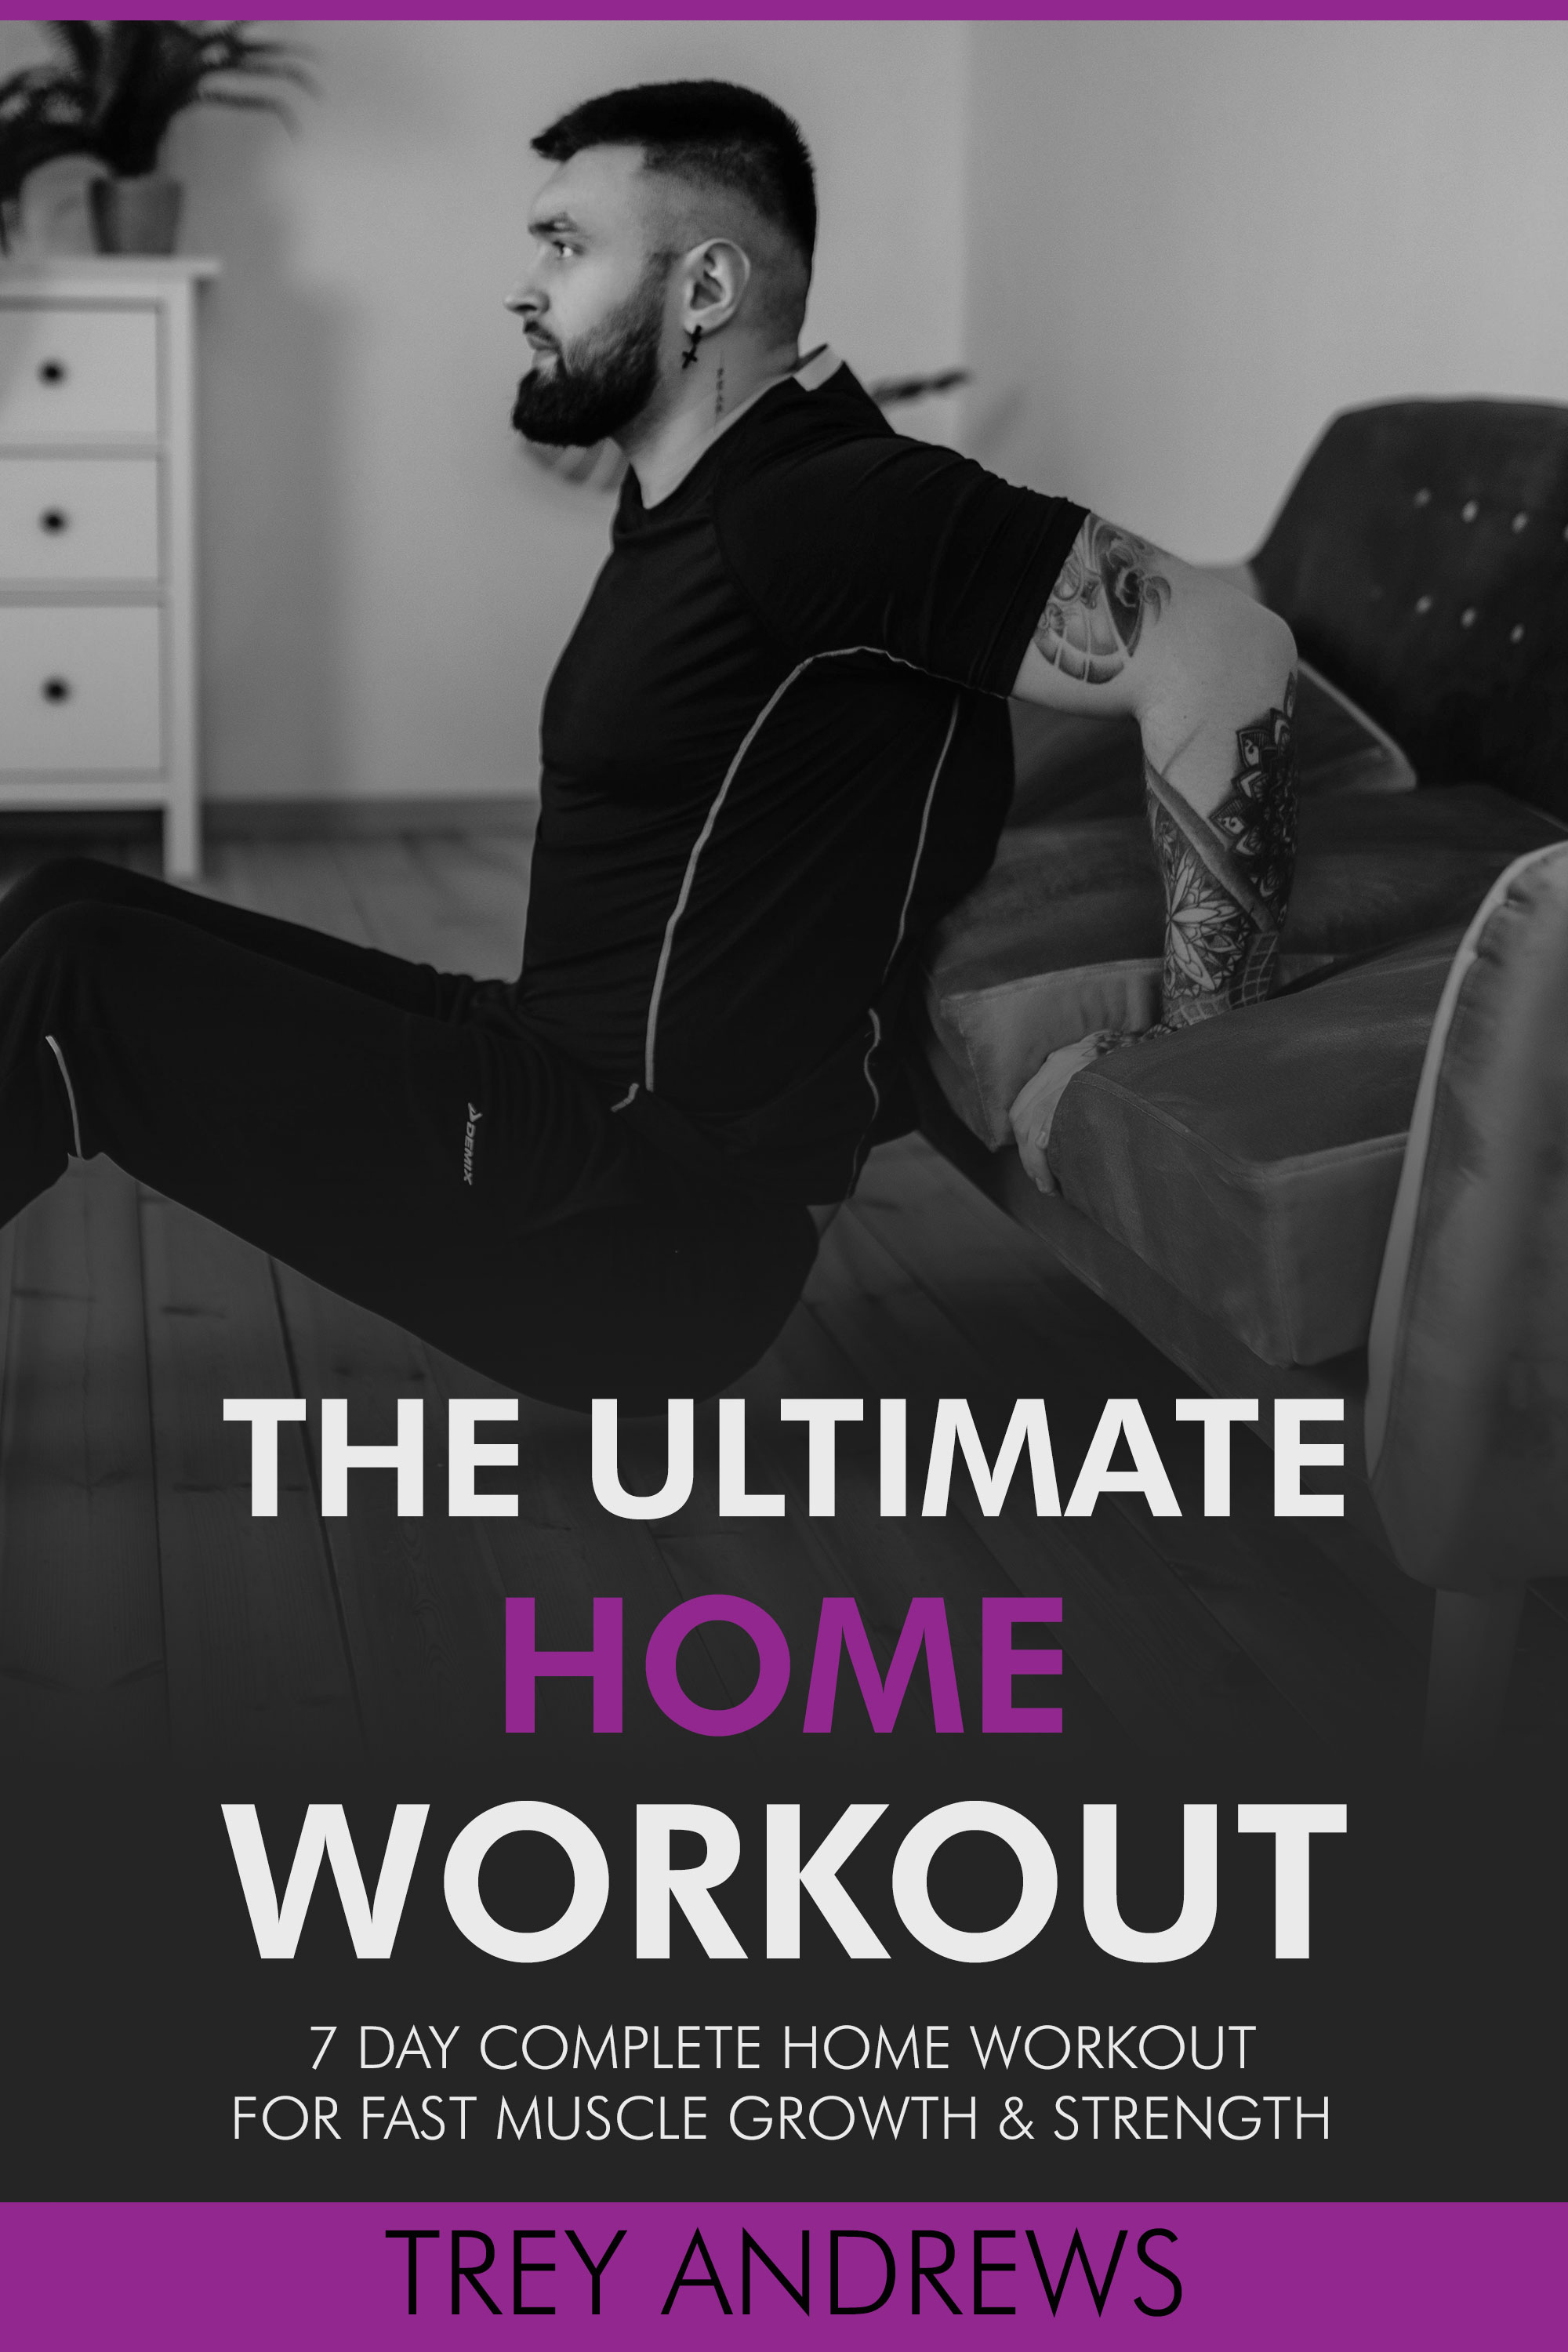 Home Exercises